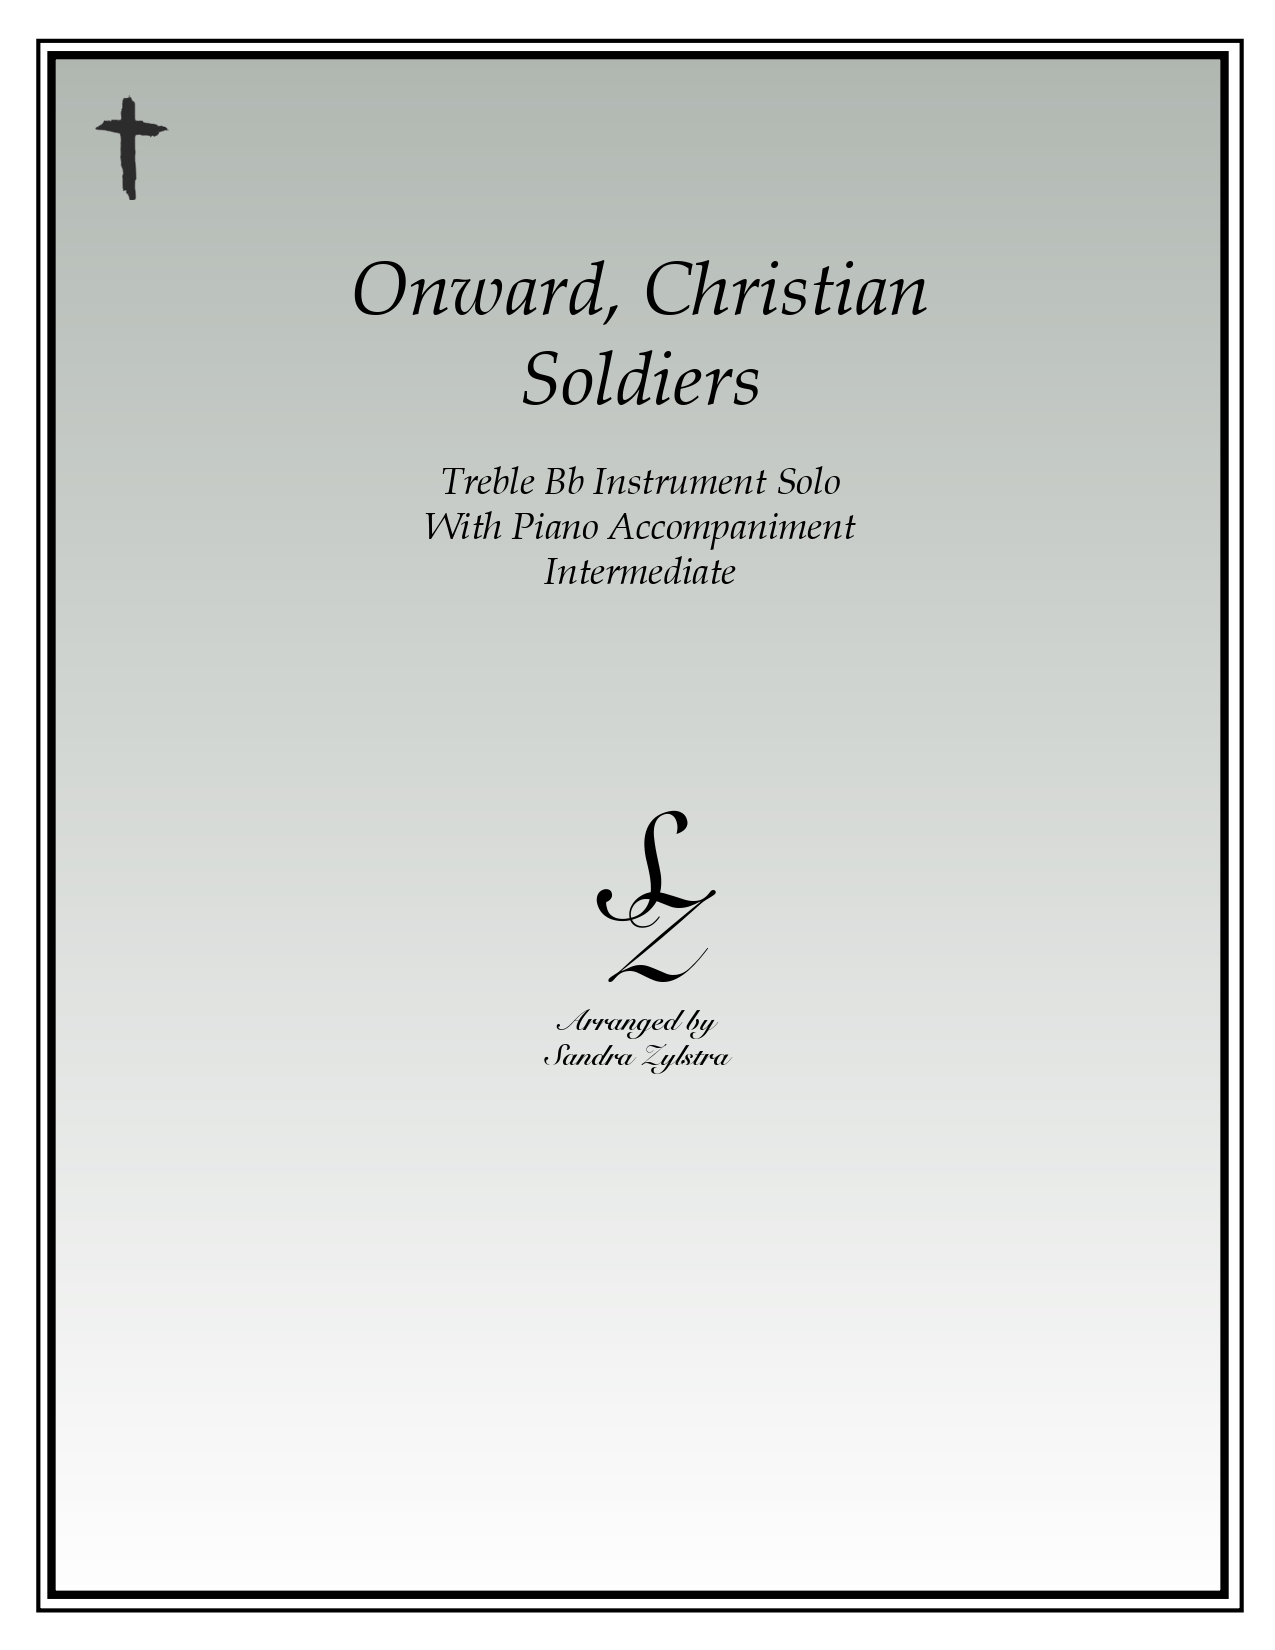 Onward Christian Soldiers Bb instrument solo part cover page 00011